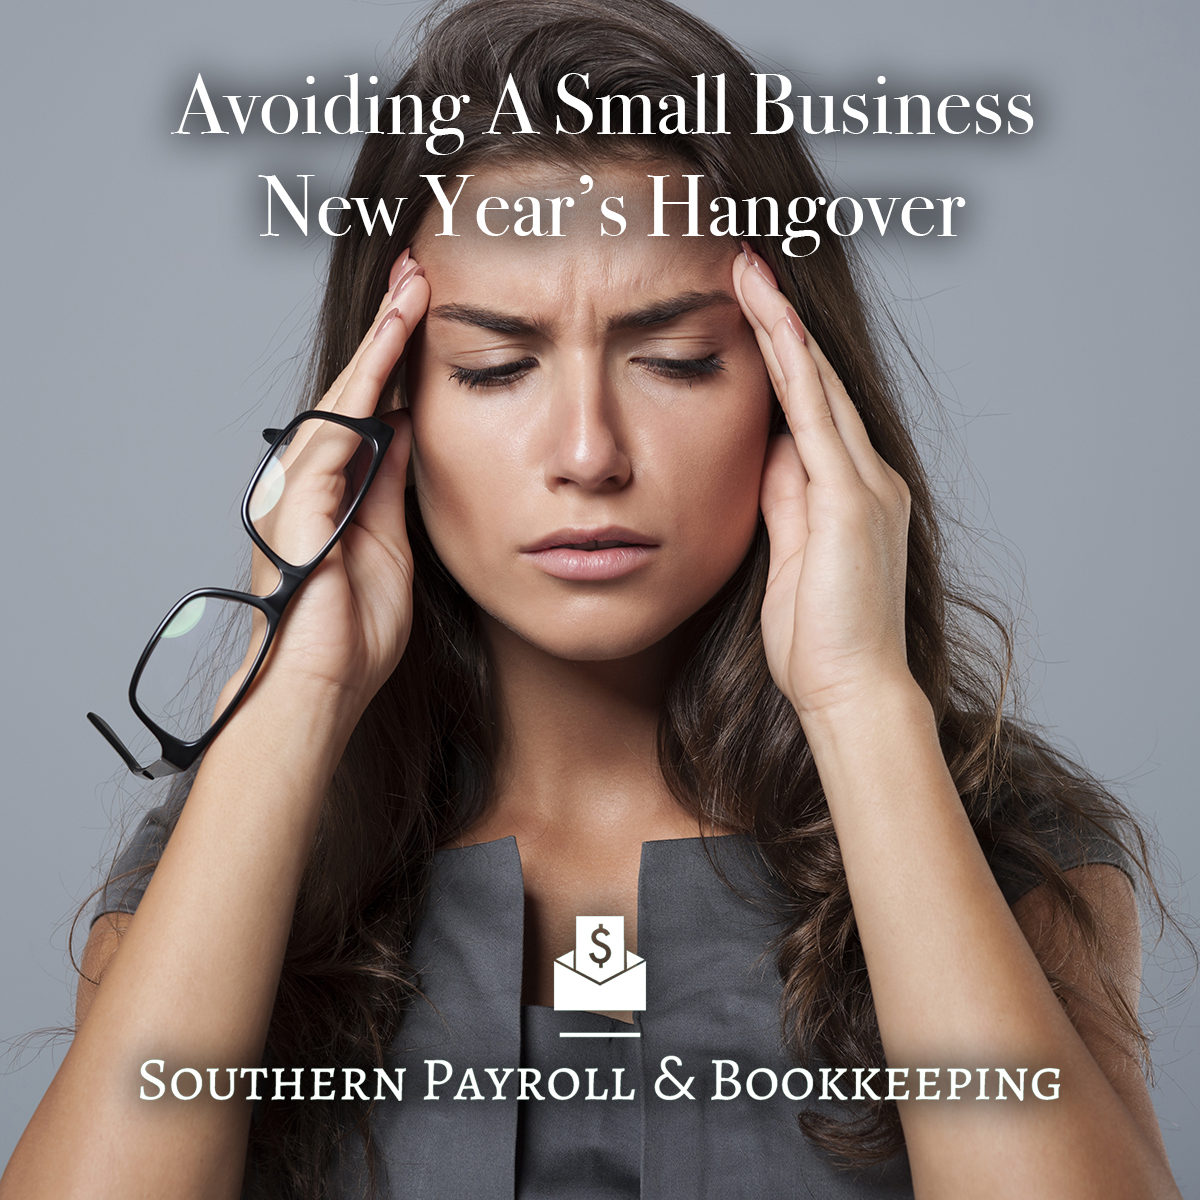 Avoiding a Small Business New Year’s Hangover